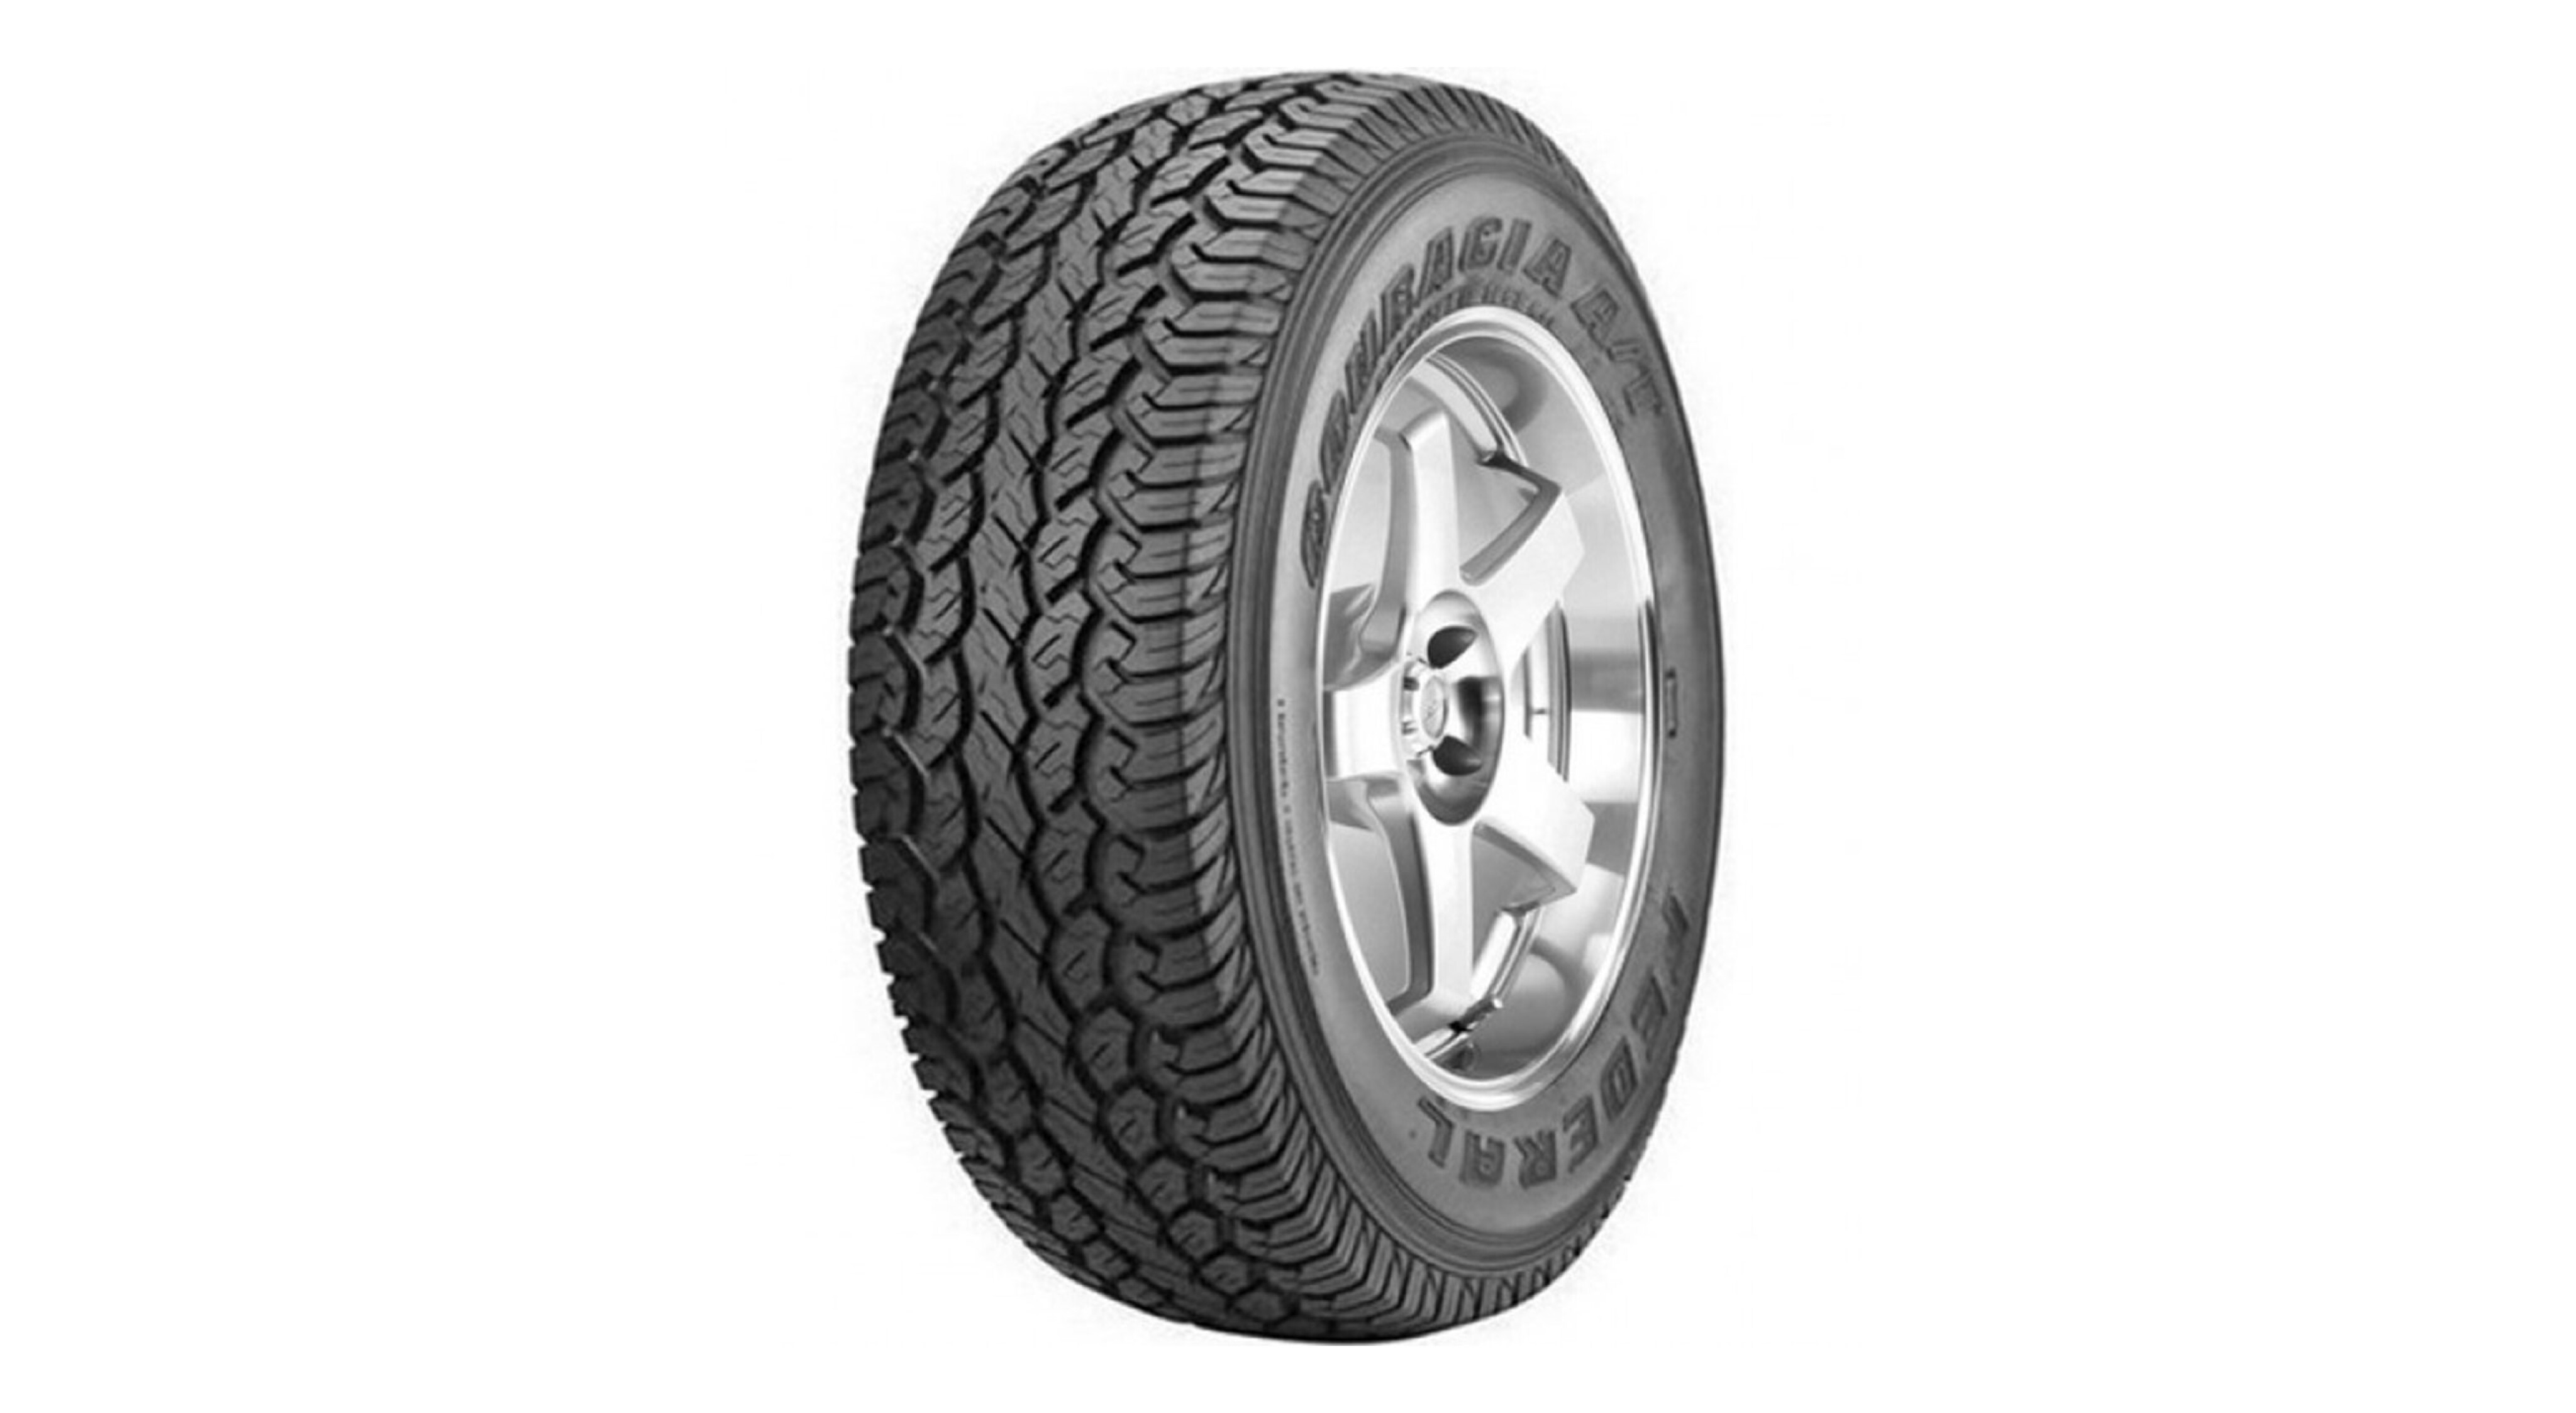 63c0139a/federal couragia best 4x4 tyre jpg